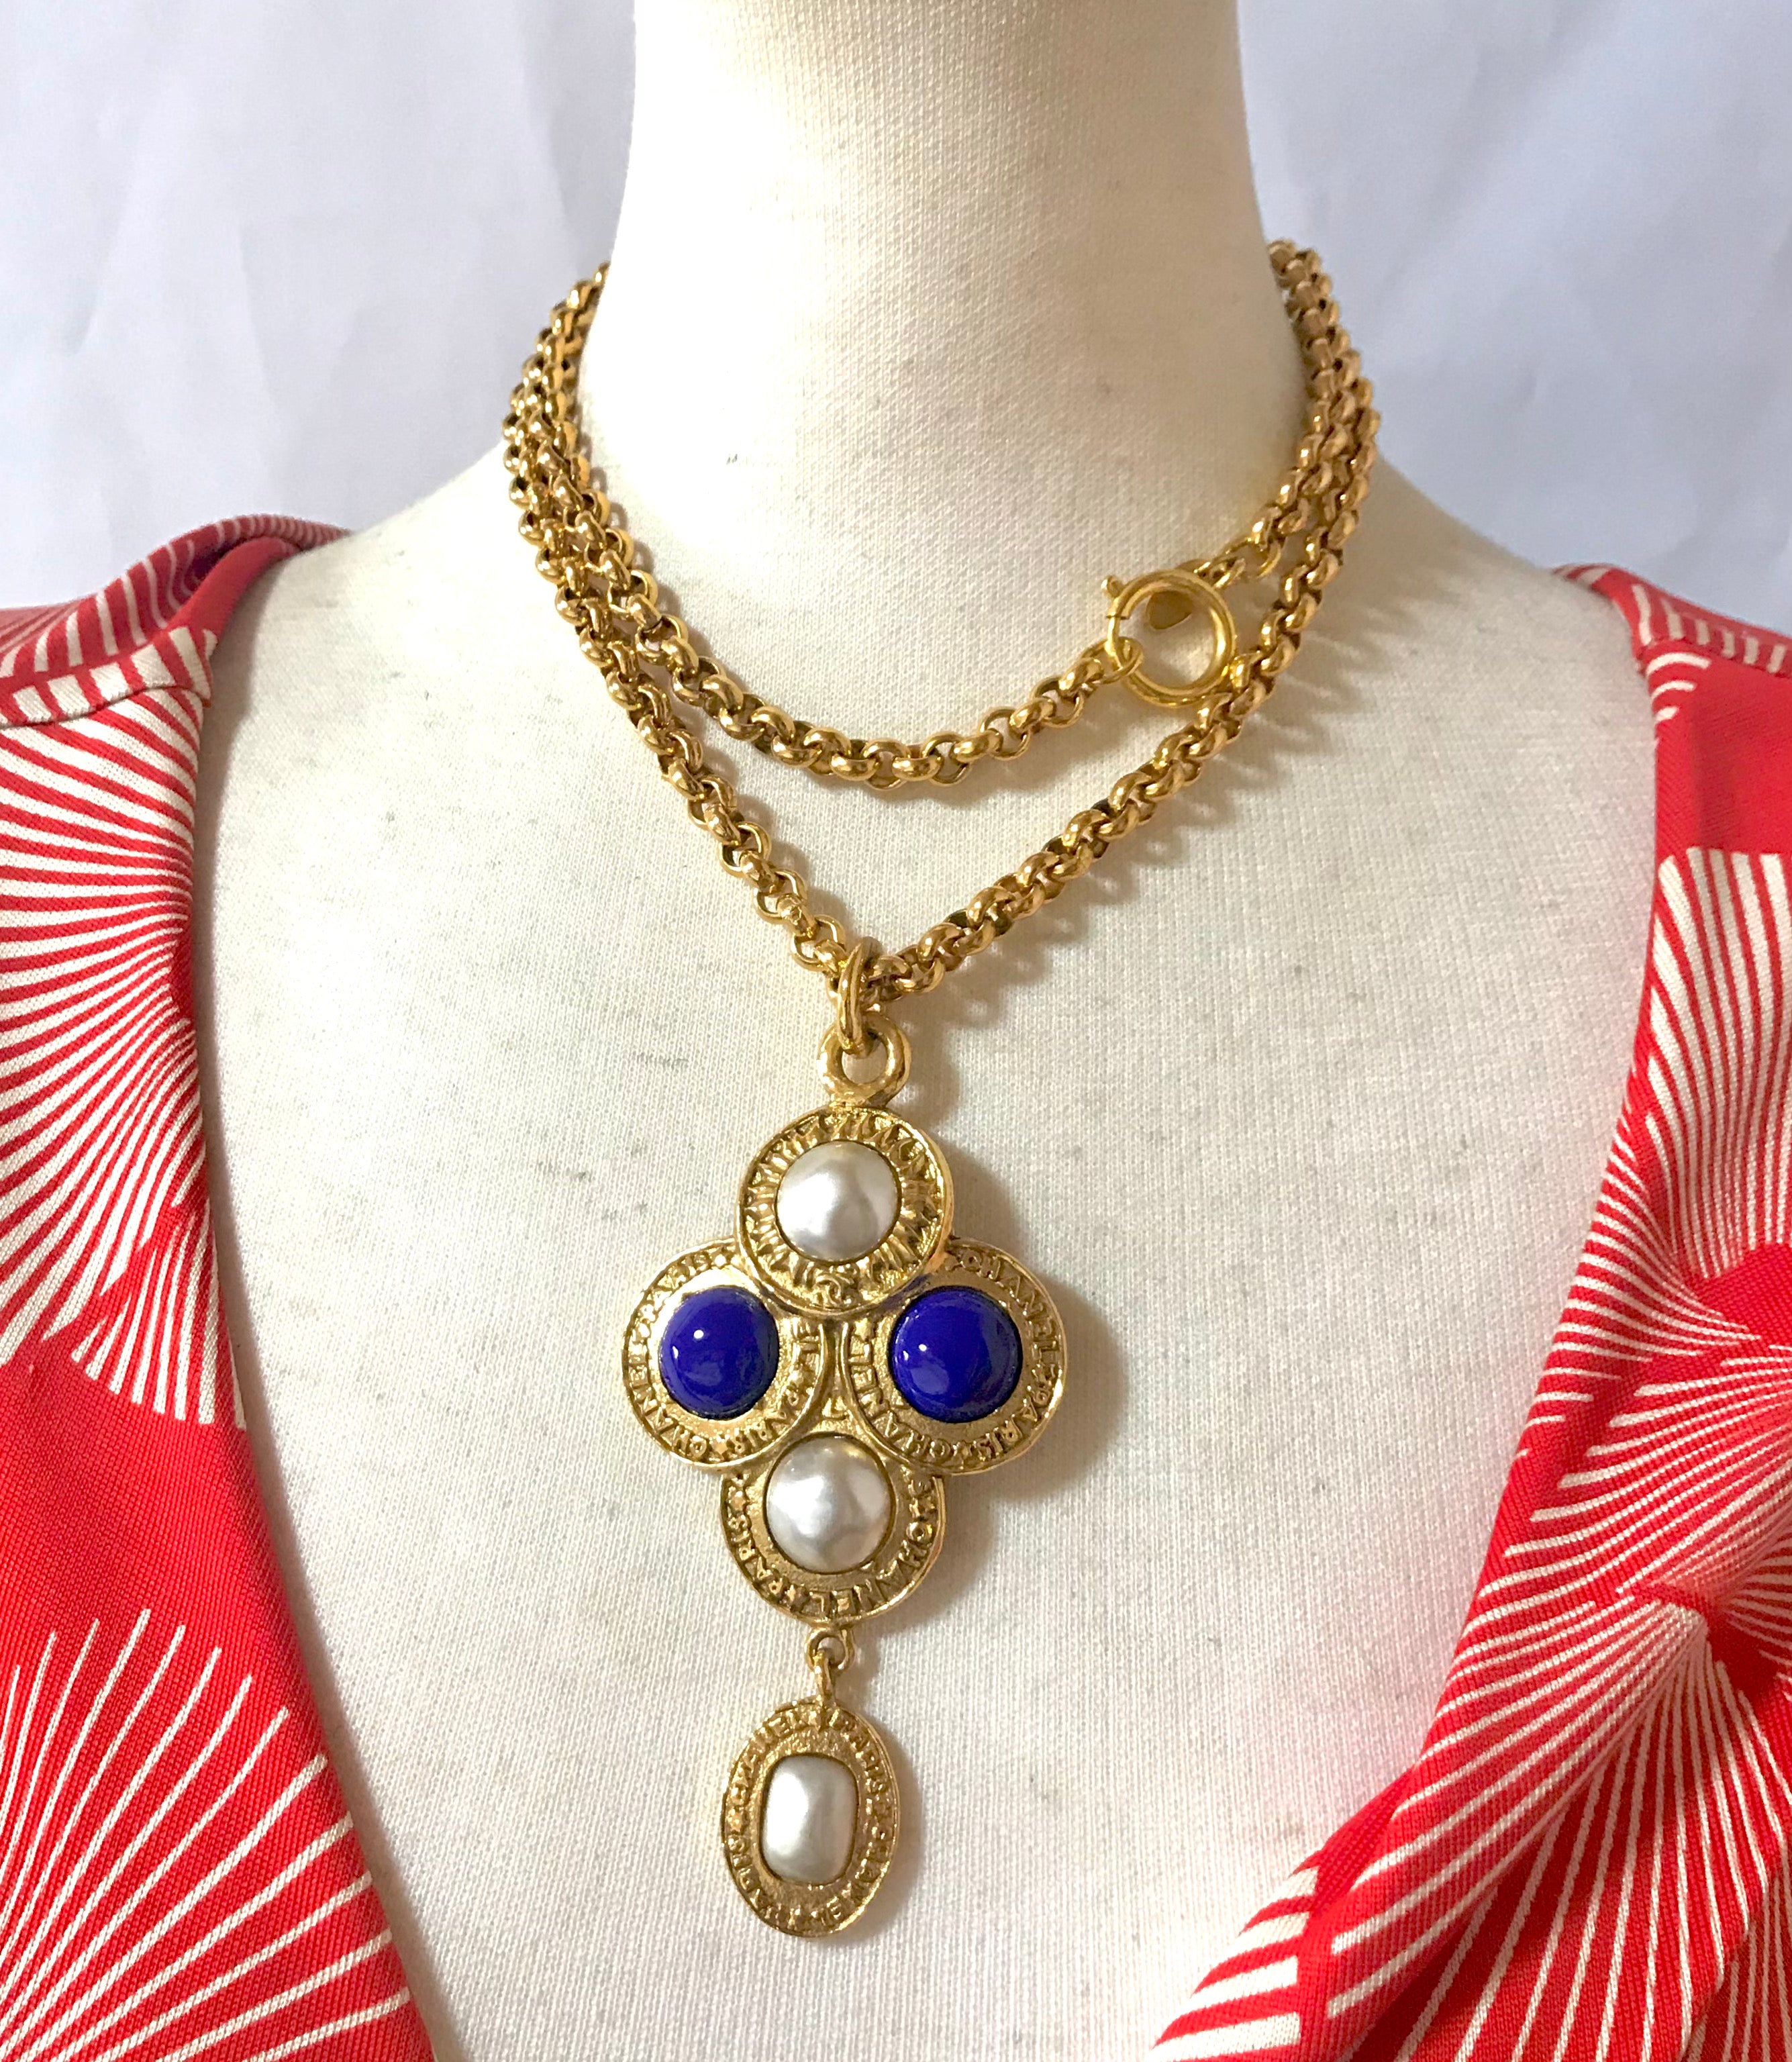 Vintage CHANEL pearl and blue stone necklace with logo engraved